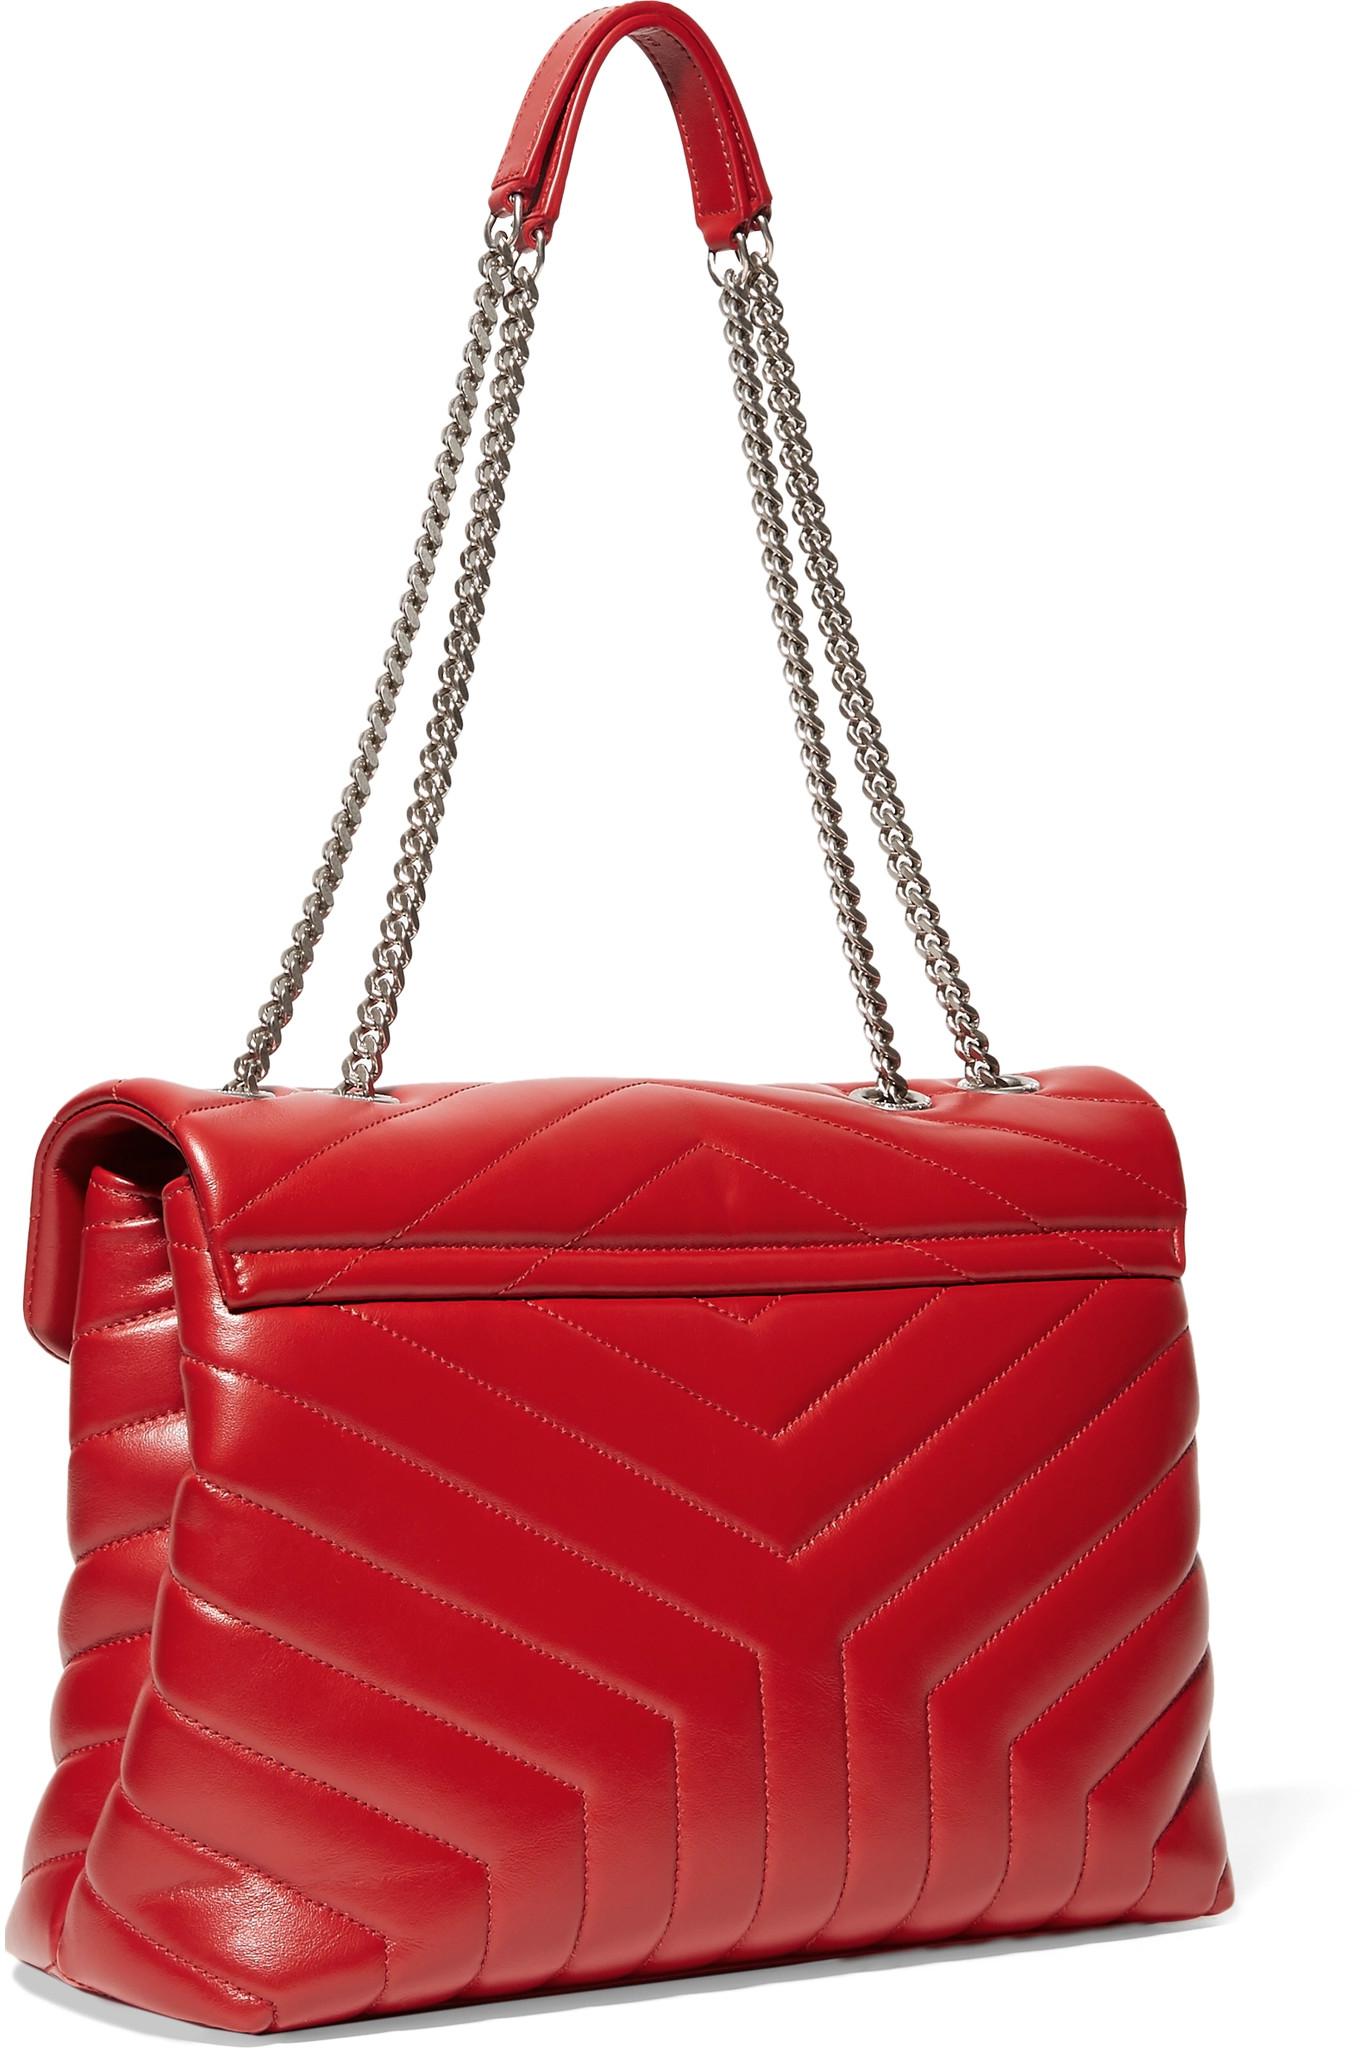 Gorgeous Vintage Lipstick Red Quilted Leather Louis Feraud Bag